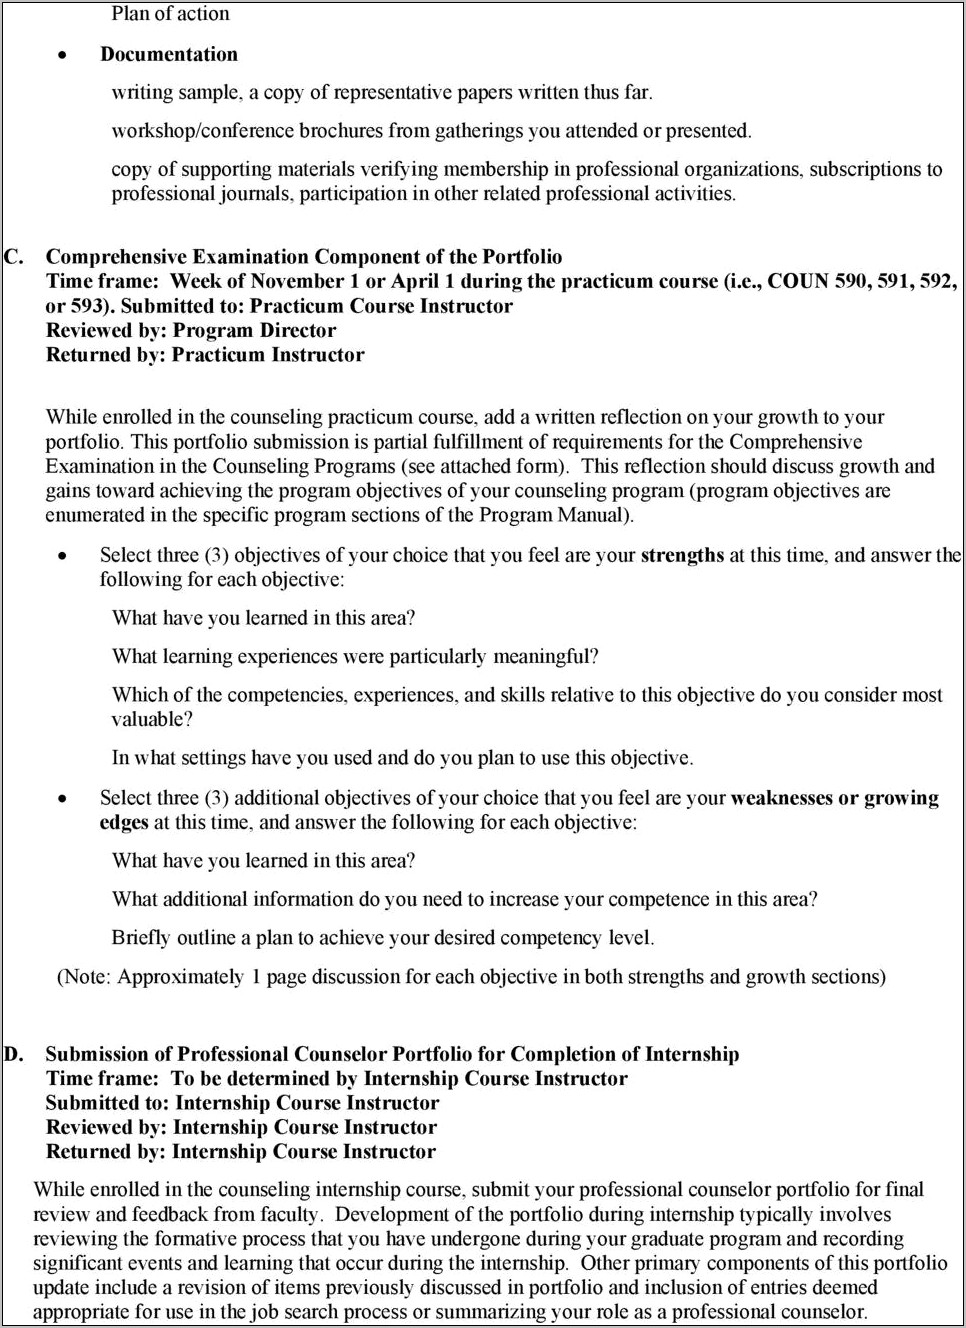 Resume Objective For Counseling Practicum